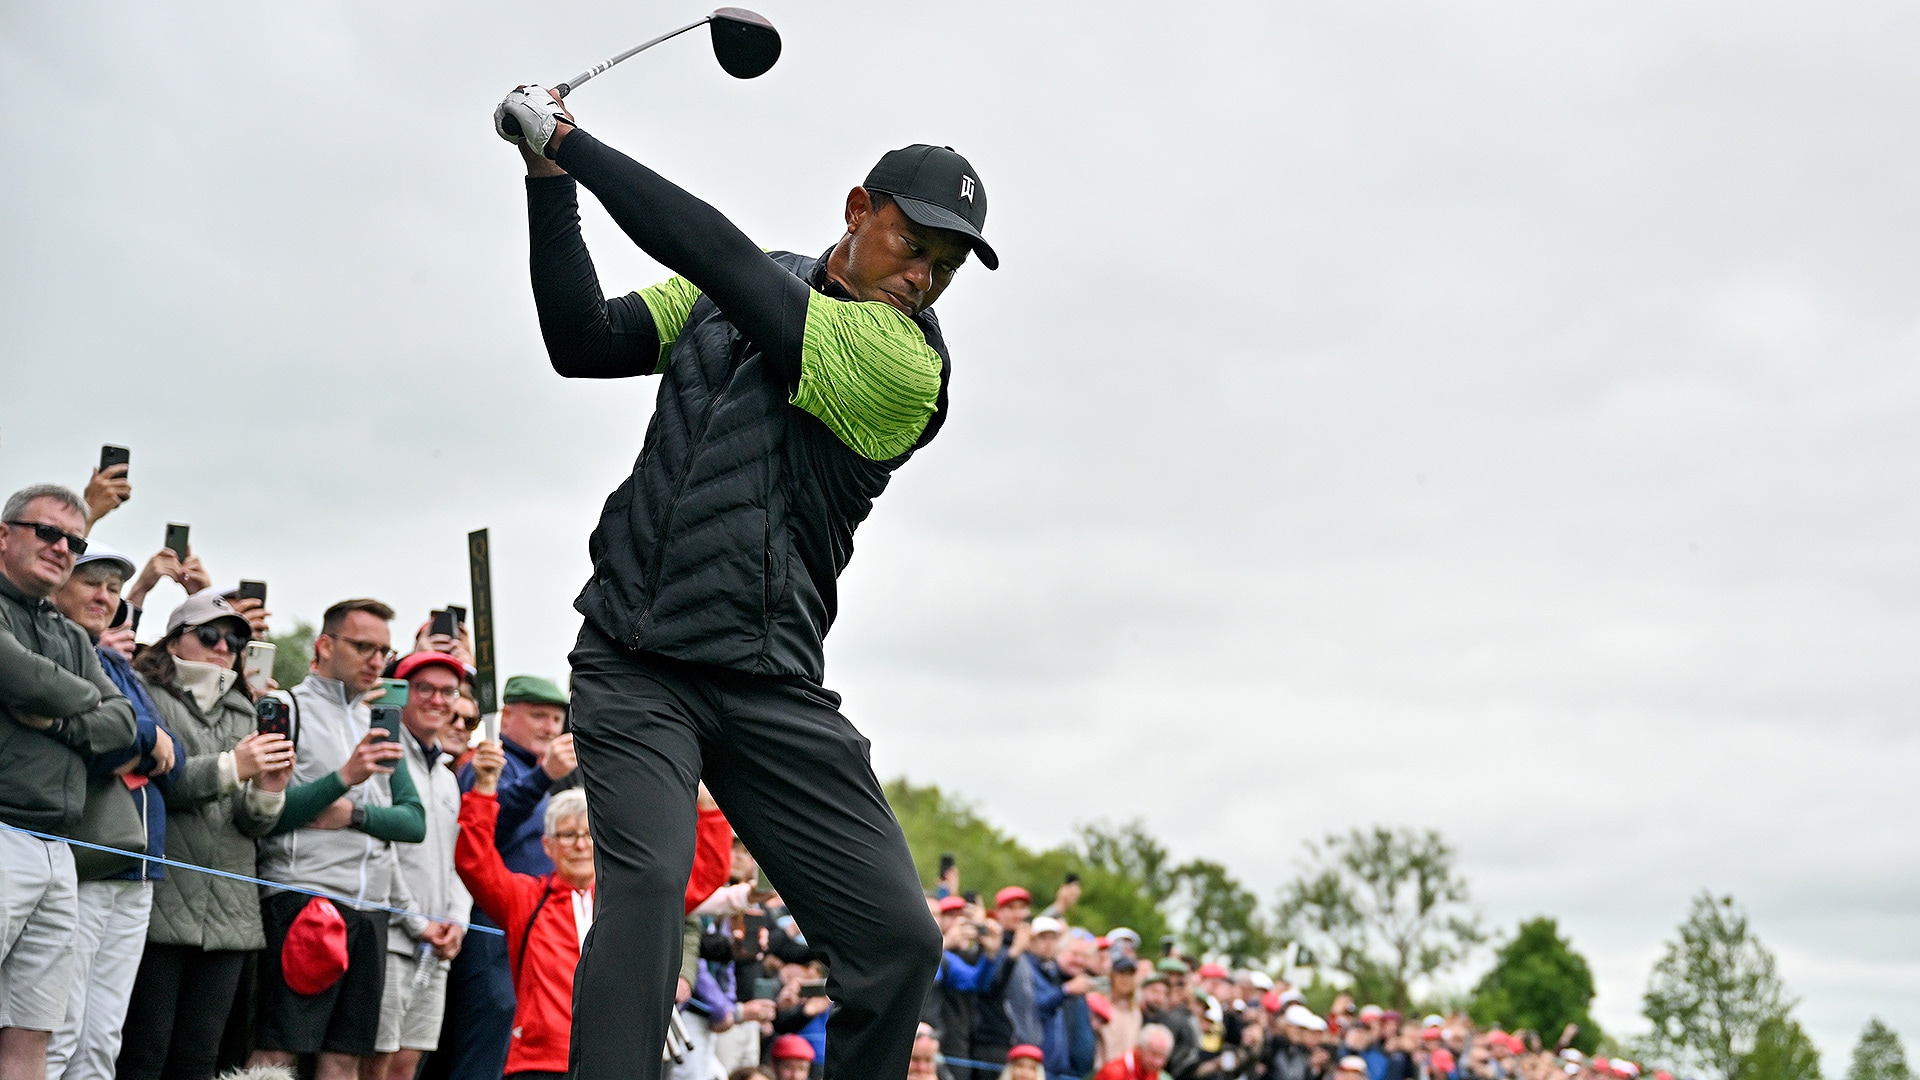 ‘Don’t look at our scorecard’: Tiger Woods opens JP McManus Pro-Am in 77